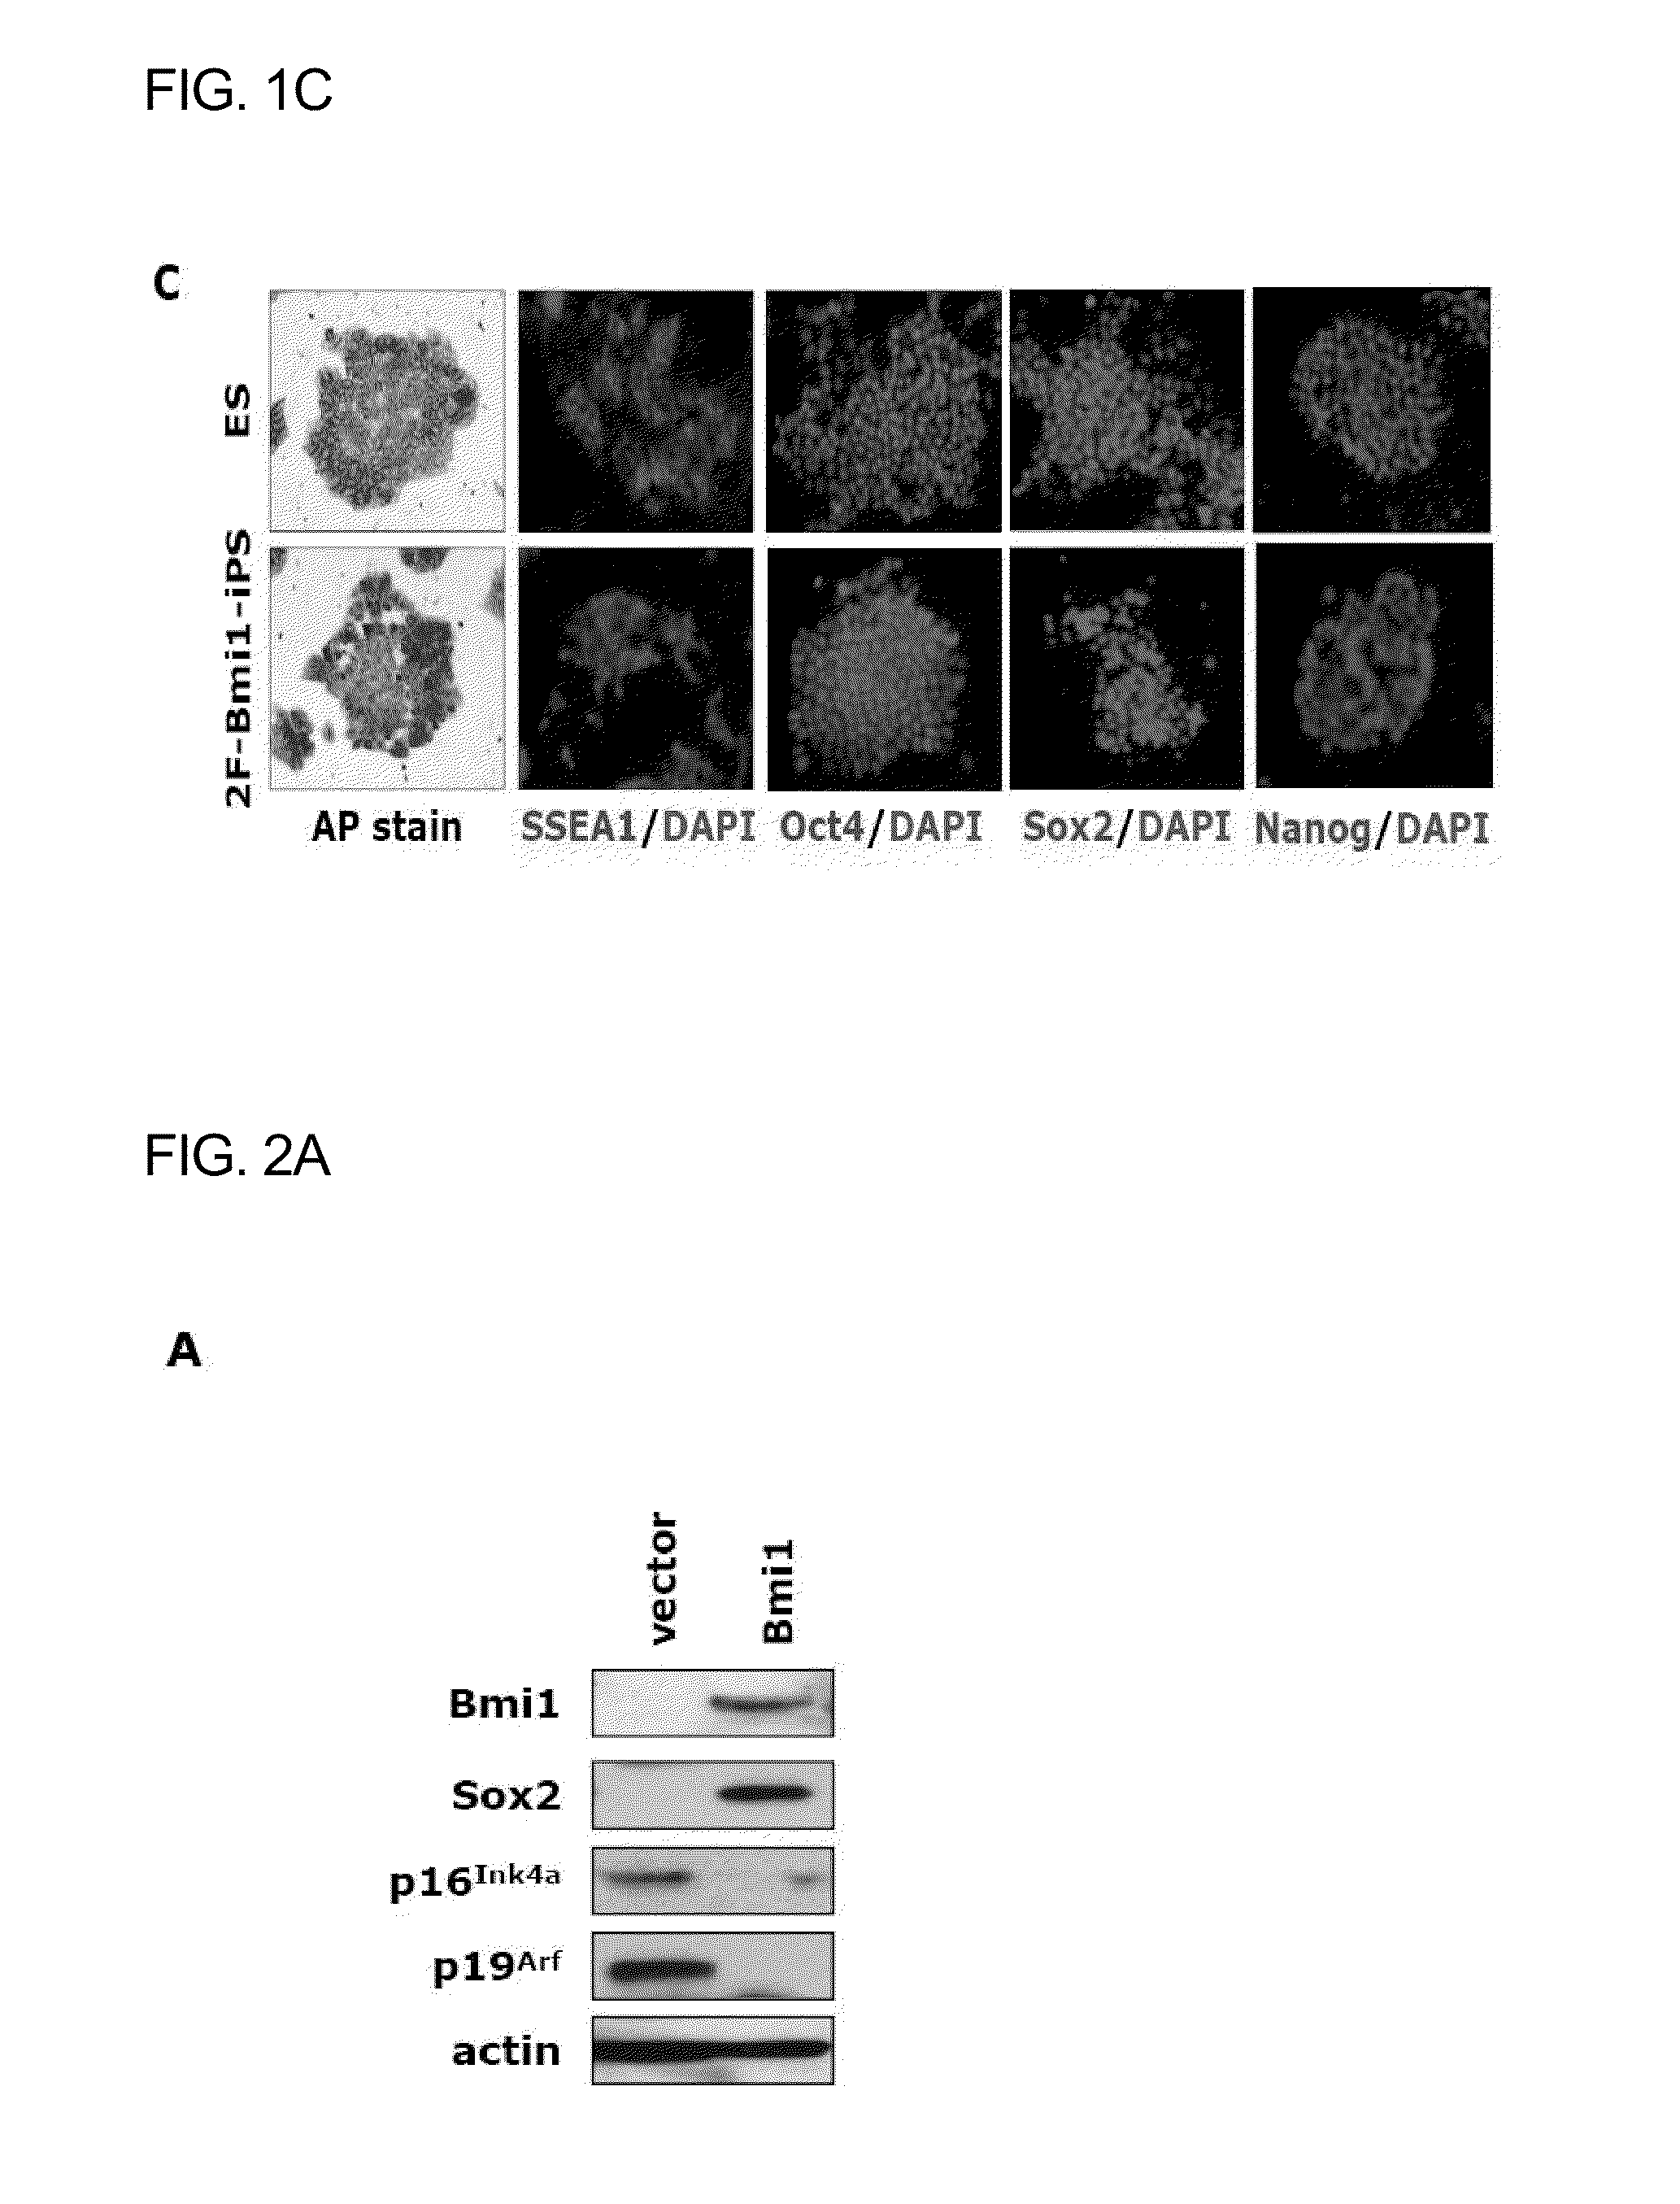 COMPOSITION FOR REPROGRAMMING SOMATIC CELLS TO GENERATE INDUCED PLURIPOTENT STEM CELLS, COMPRISING Oct4 IN COMBINATION WITH Bmi1 OR ITS UPSTREAM REGULATOR, AND METHOD FOR GENERATING INDUCED PLURIPOTENT STEM CELLS USING THE SAME